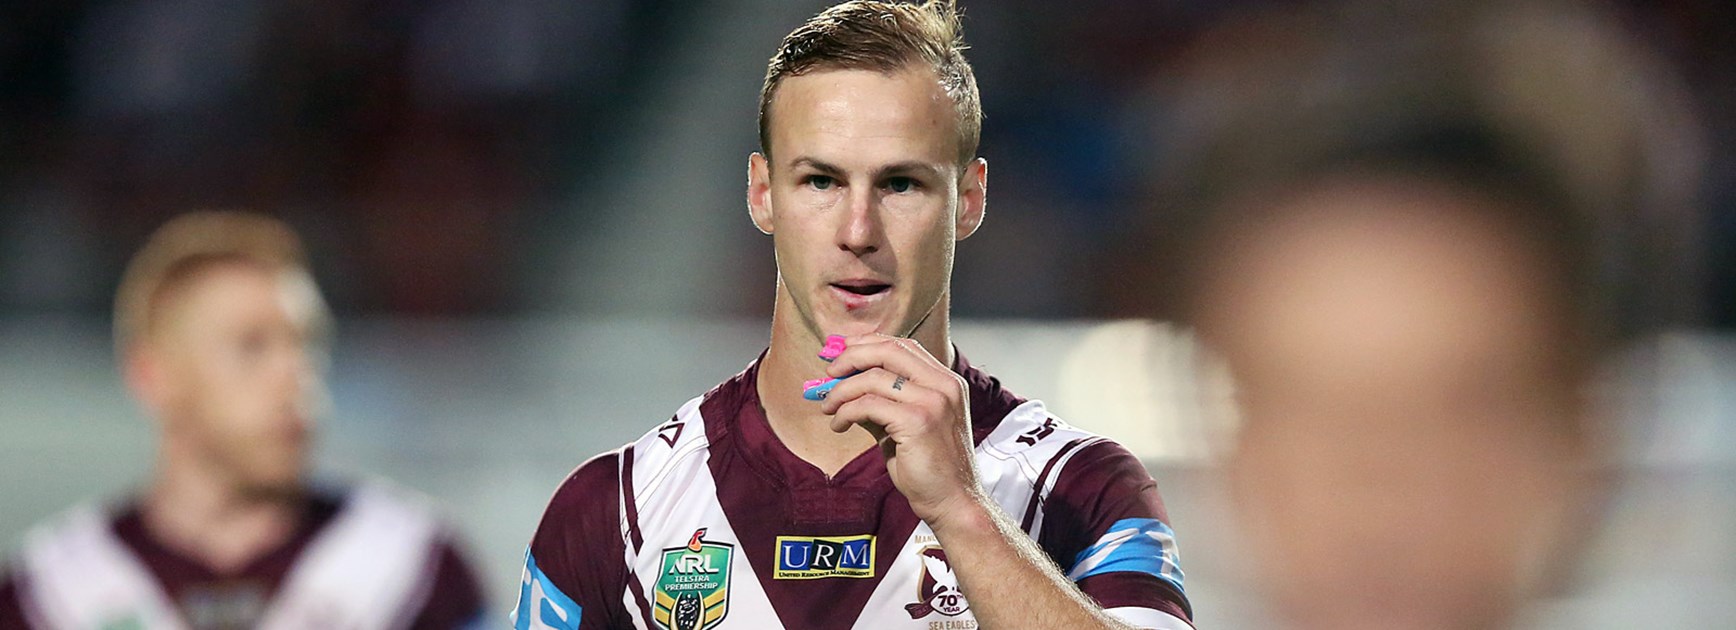 Sea Eagles halfback Daly Cherry-Evans is often the centre of attention, even though he'd rather not be.